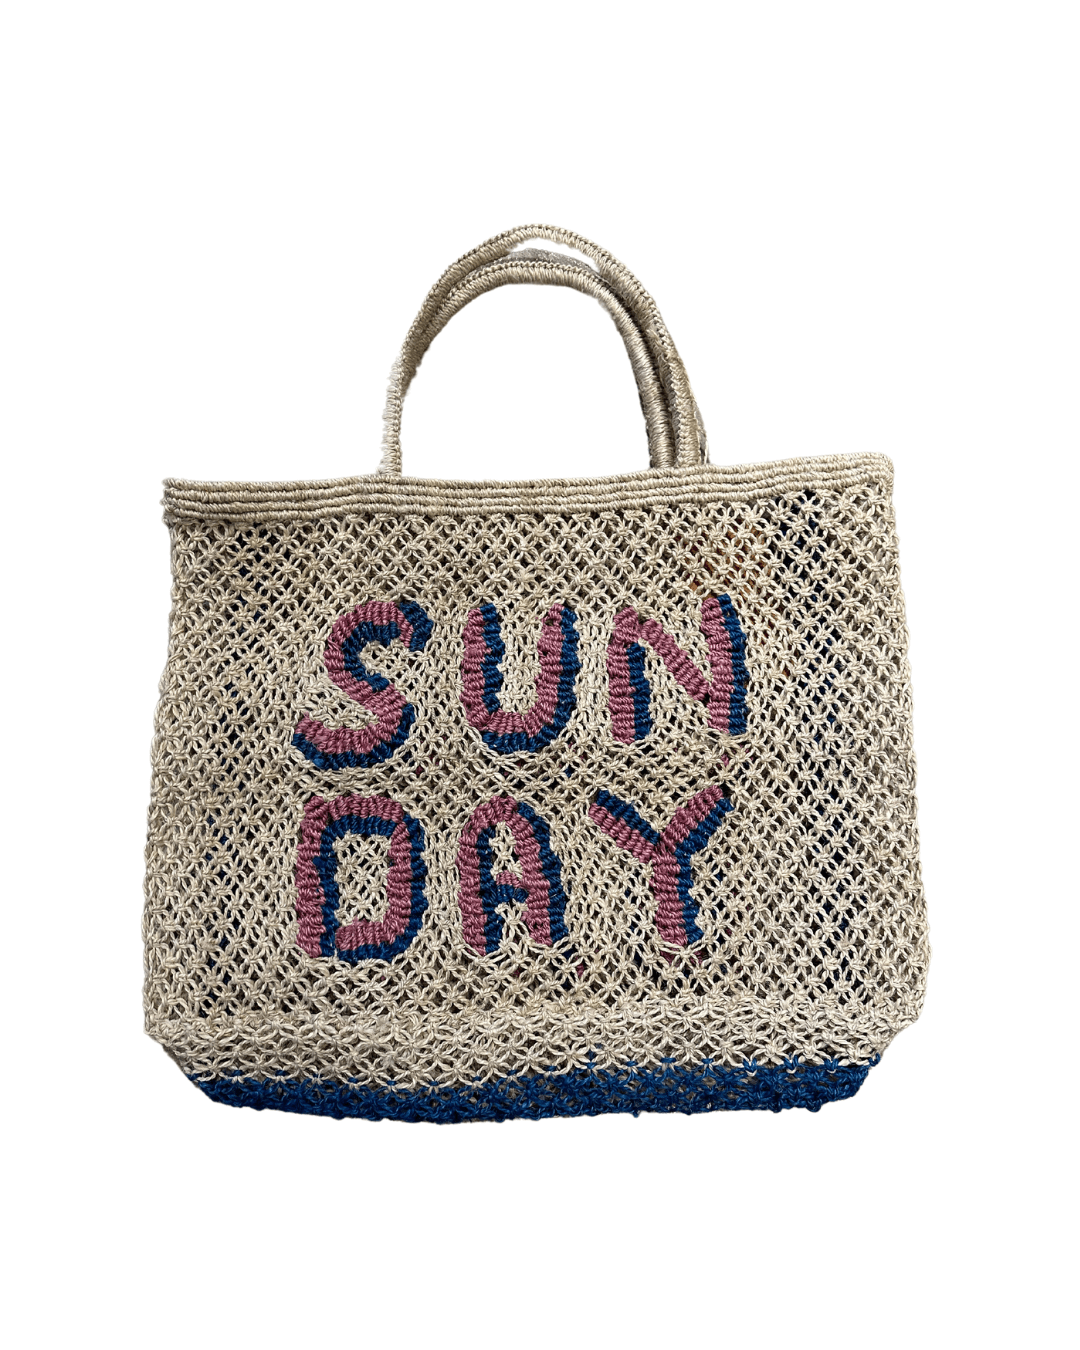 Sun Day Tote Bag by The Jacksons - Haven